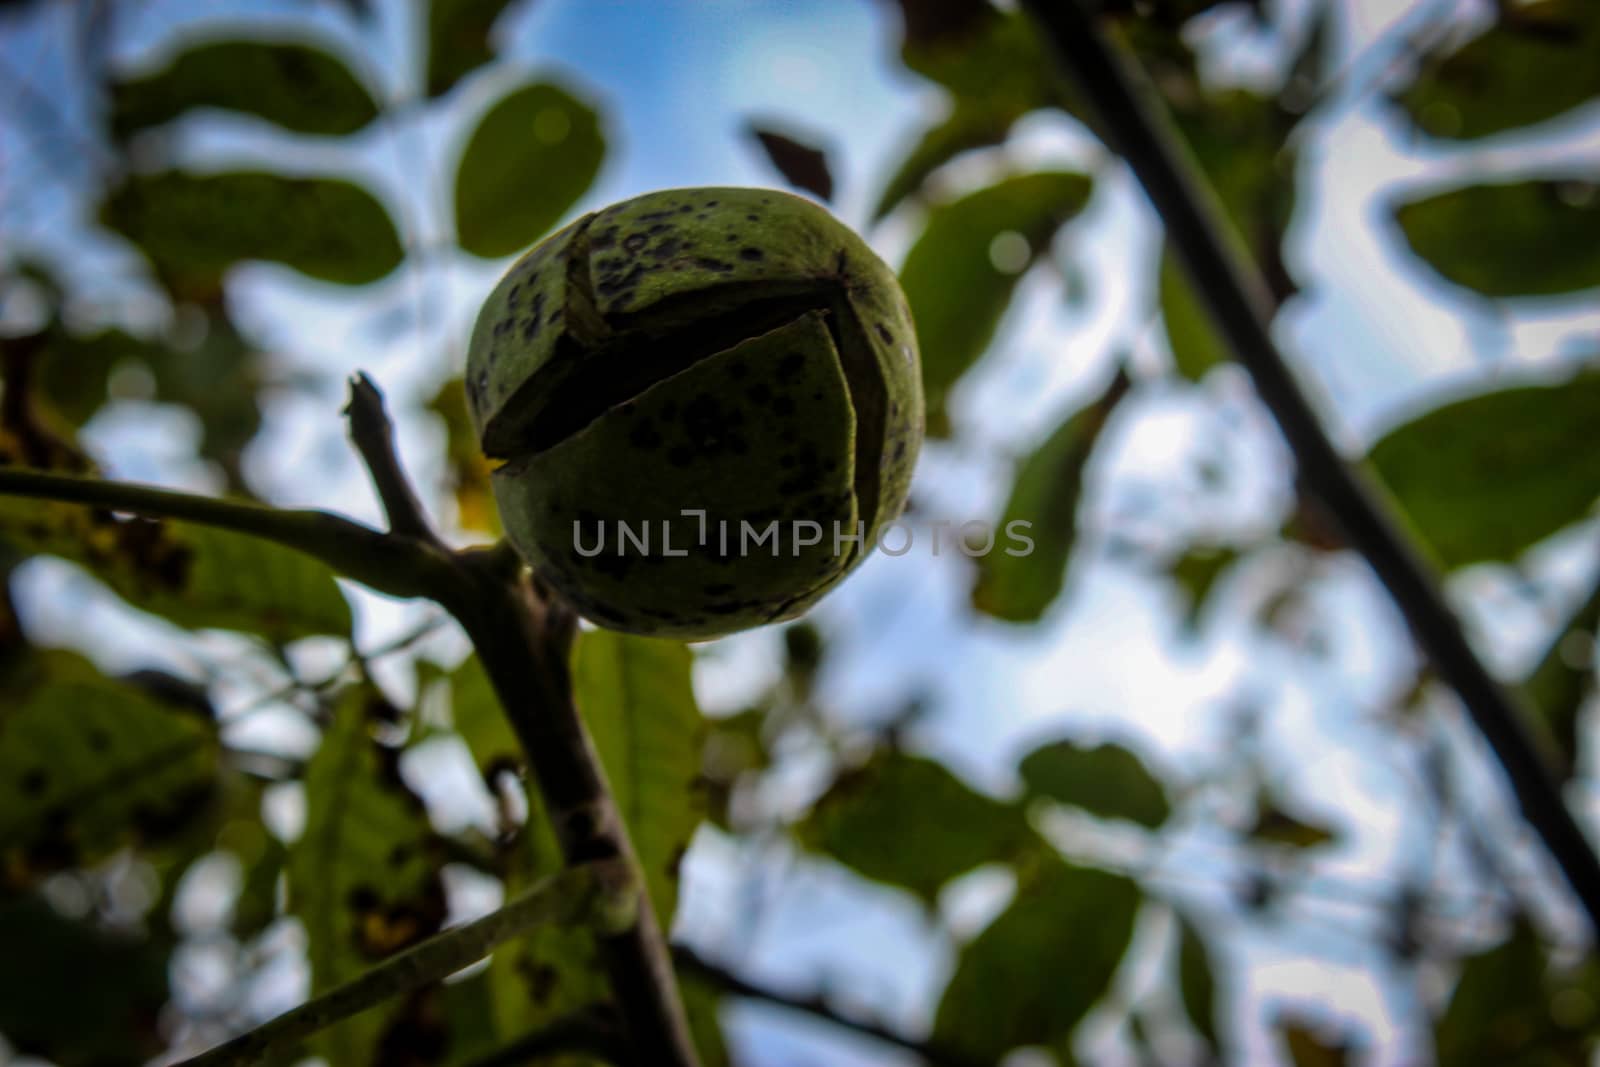 A cracked green walnut shell on a branch between the branches. Zavidovici, Bosnia and Herzegovina.